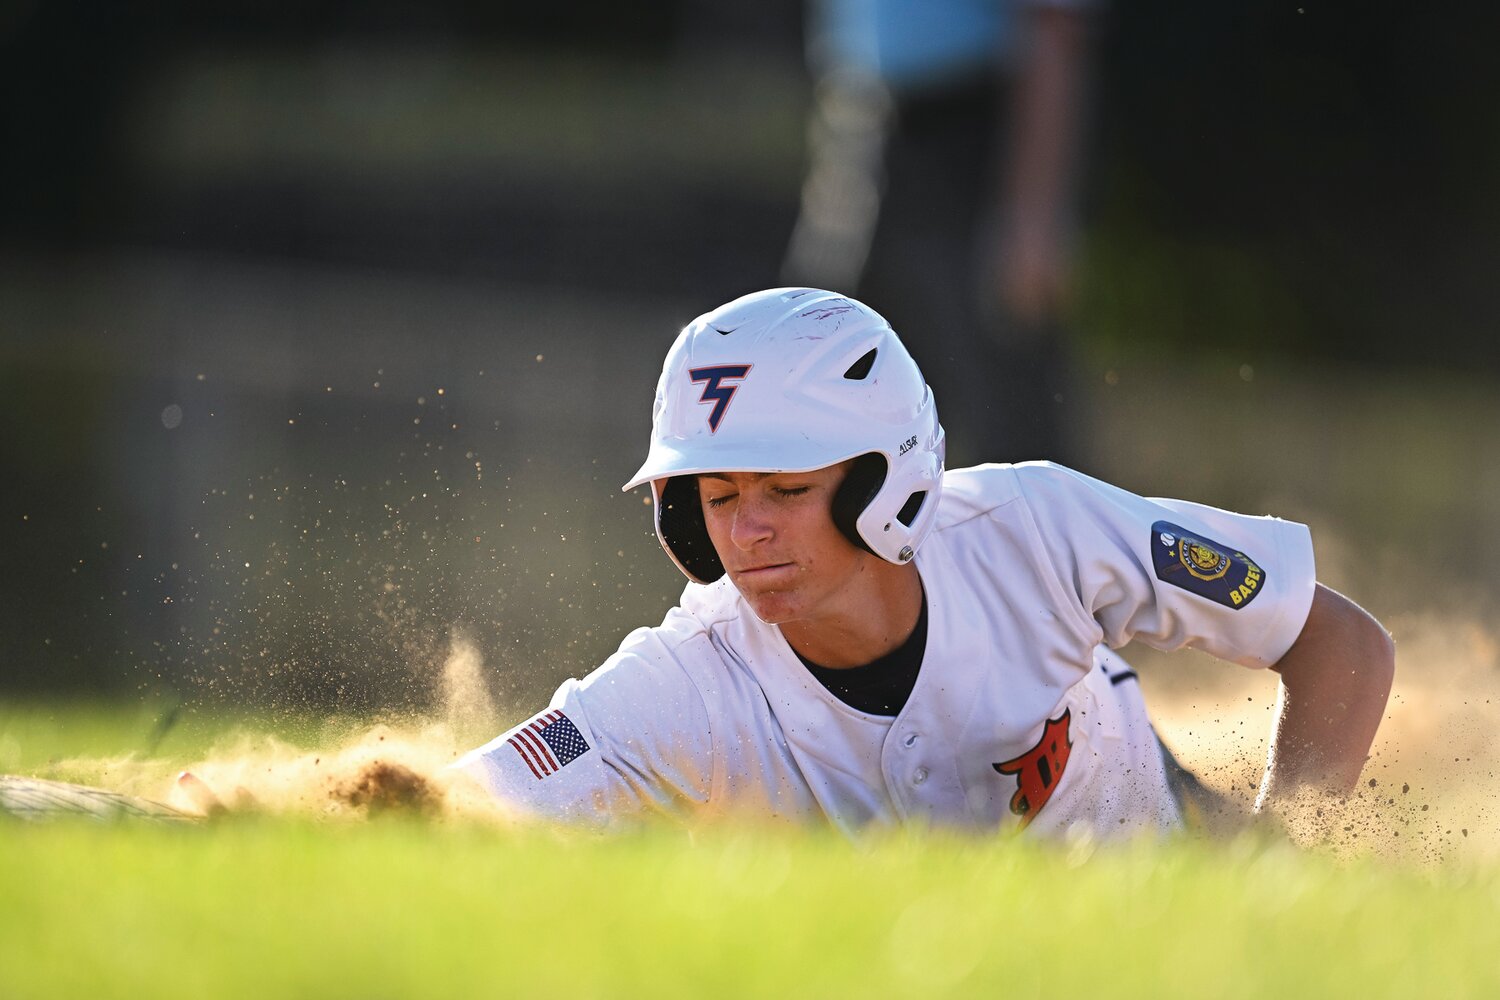 Doylestown’s Bobby Seaner slides back into first base during a third-inning pickoff attempt.